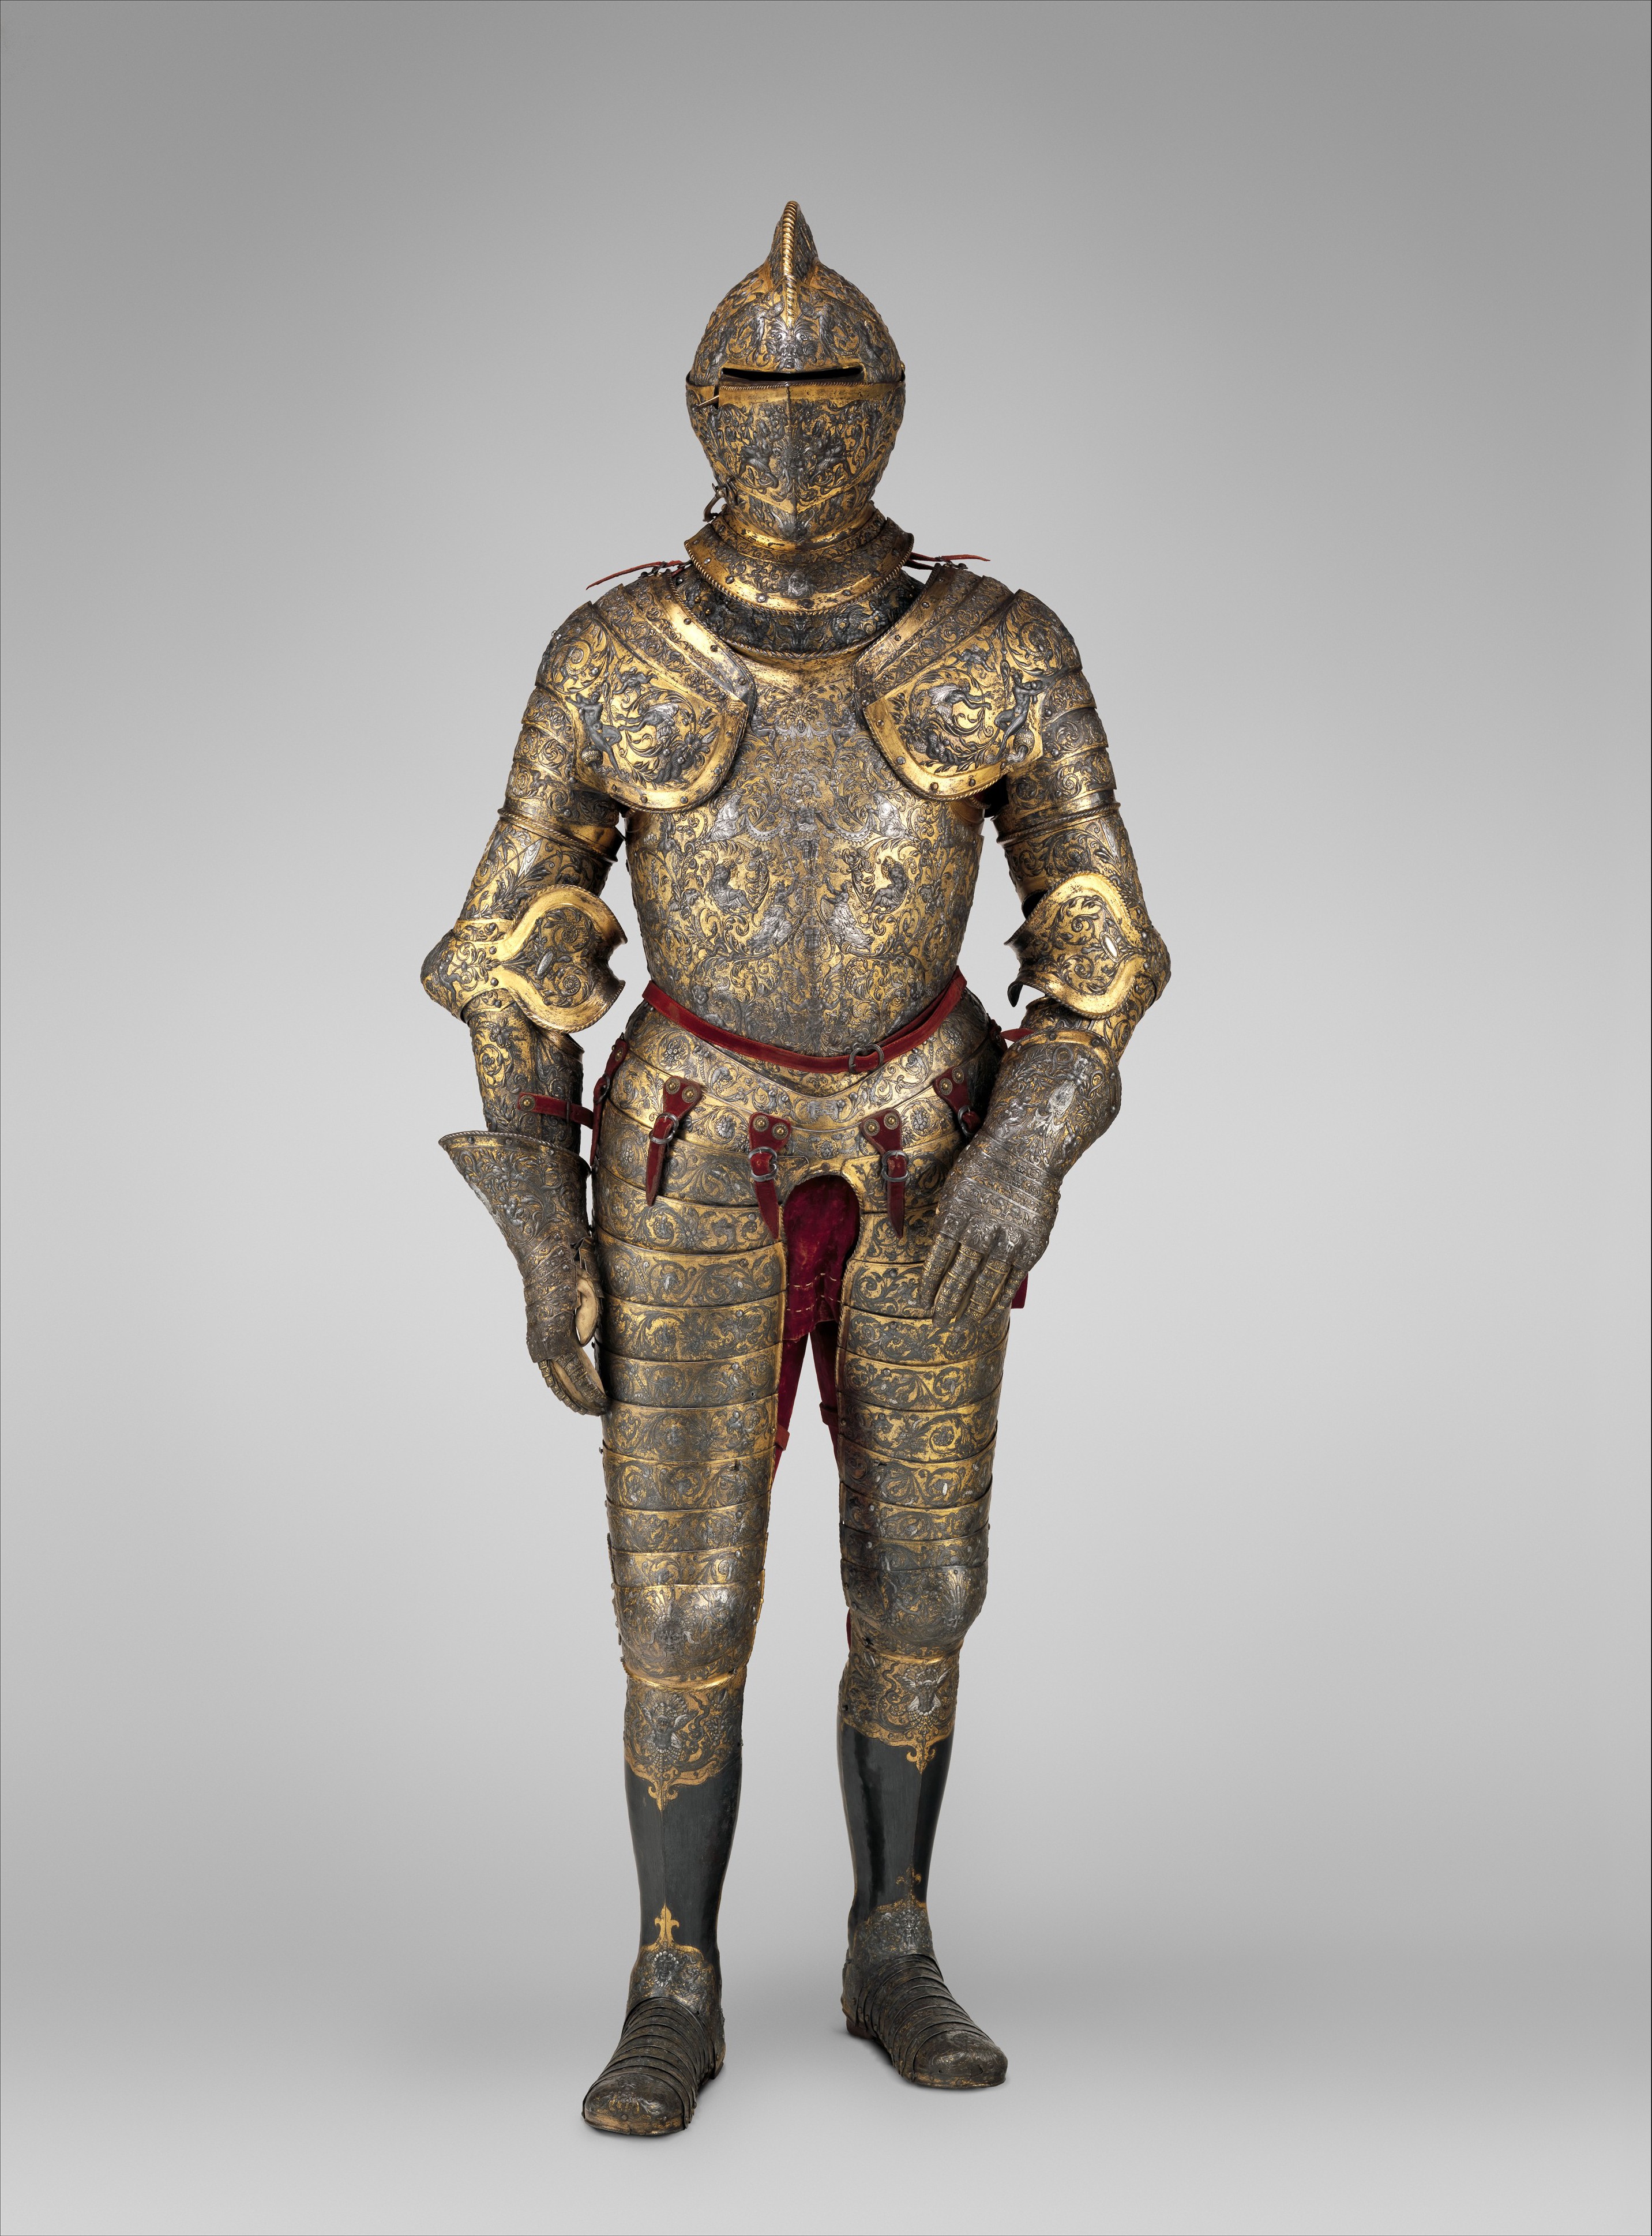 Image of Half Armor for the Foot Tournament, c.1590 (etched